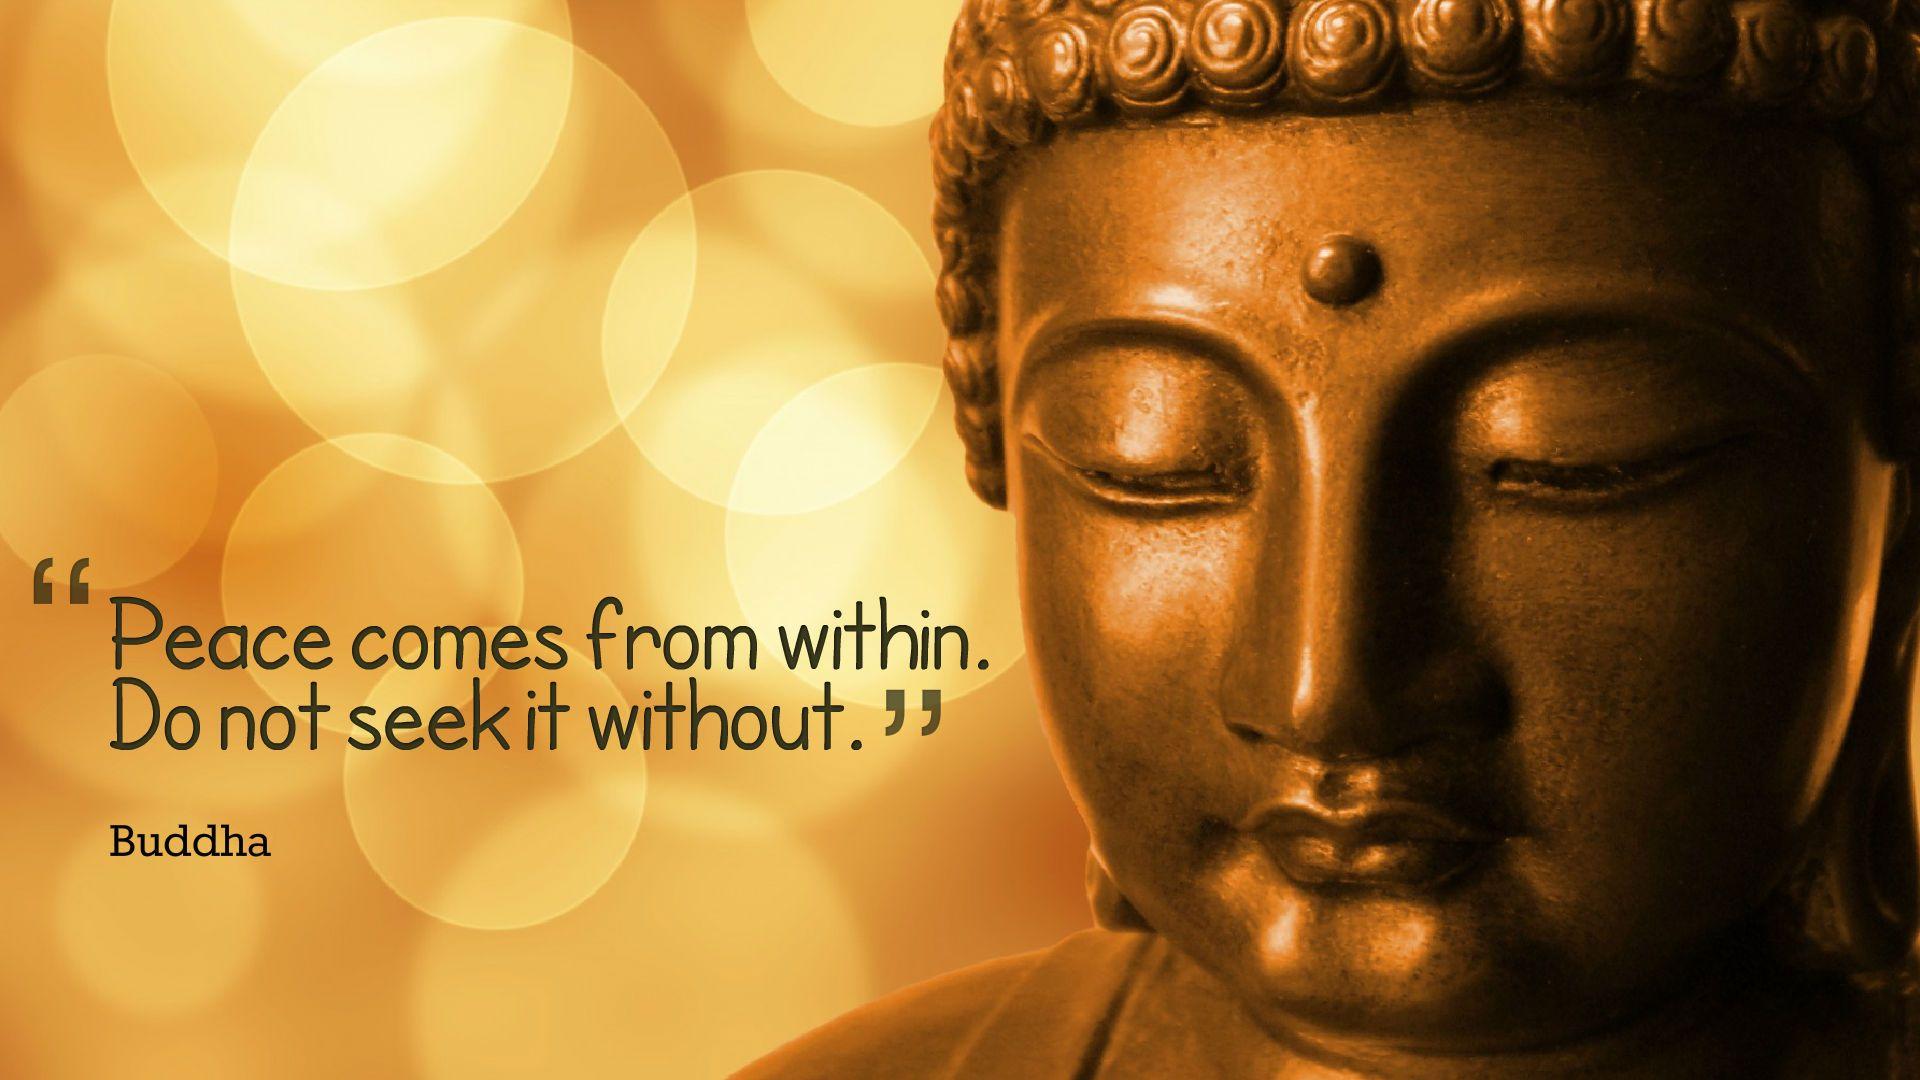 Lord Buddha Wallpapers With Sinhala Quotes